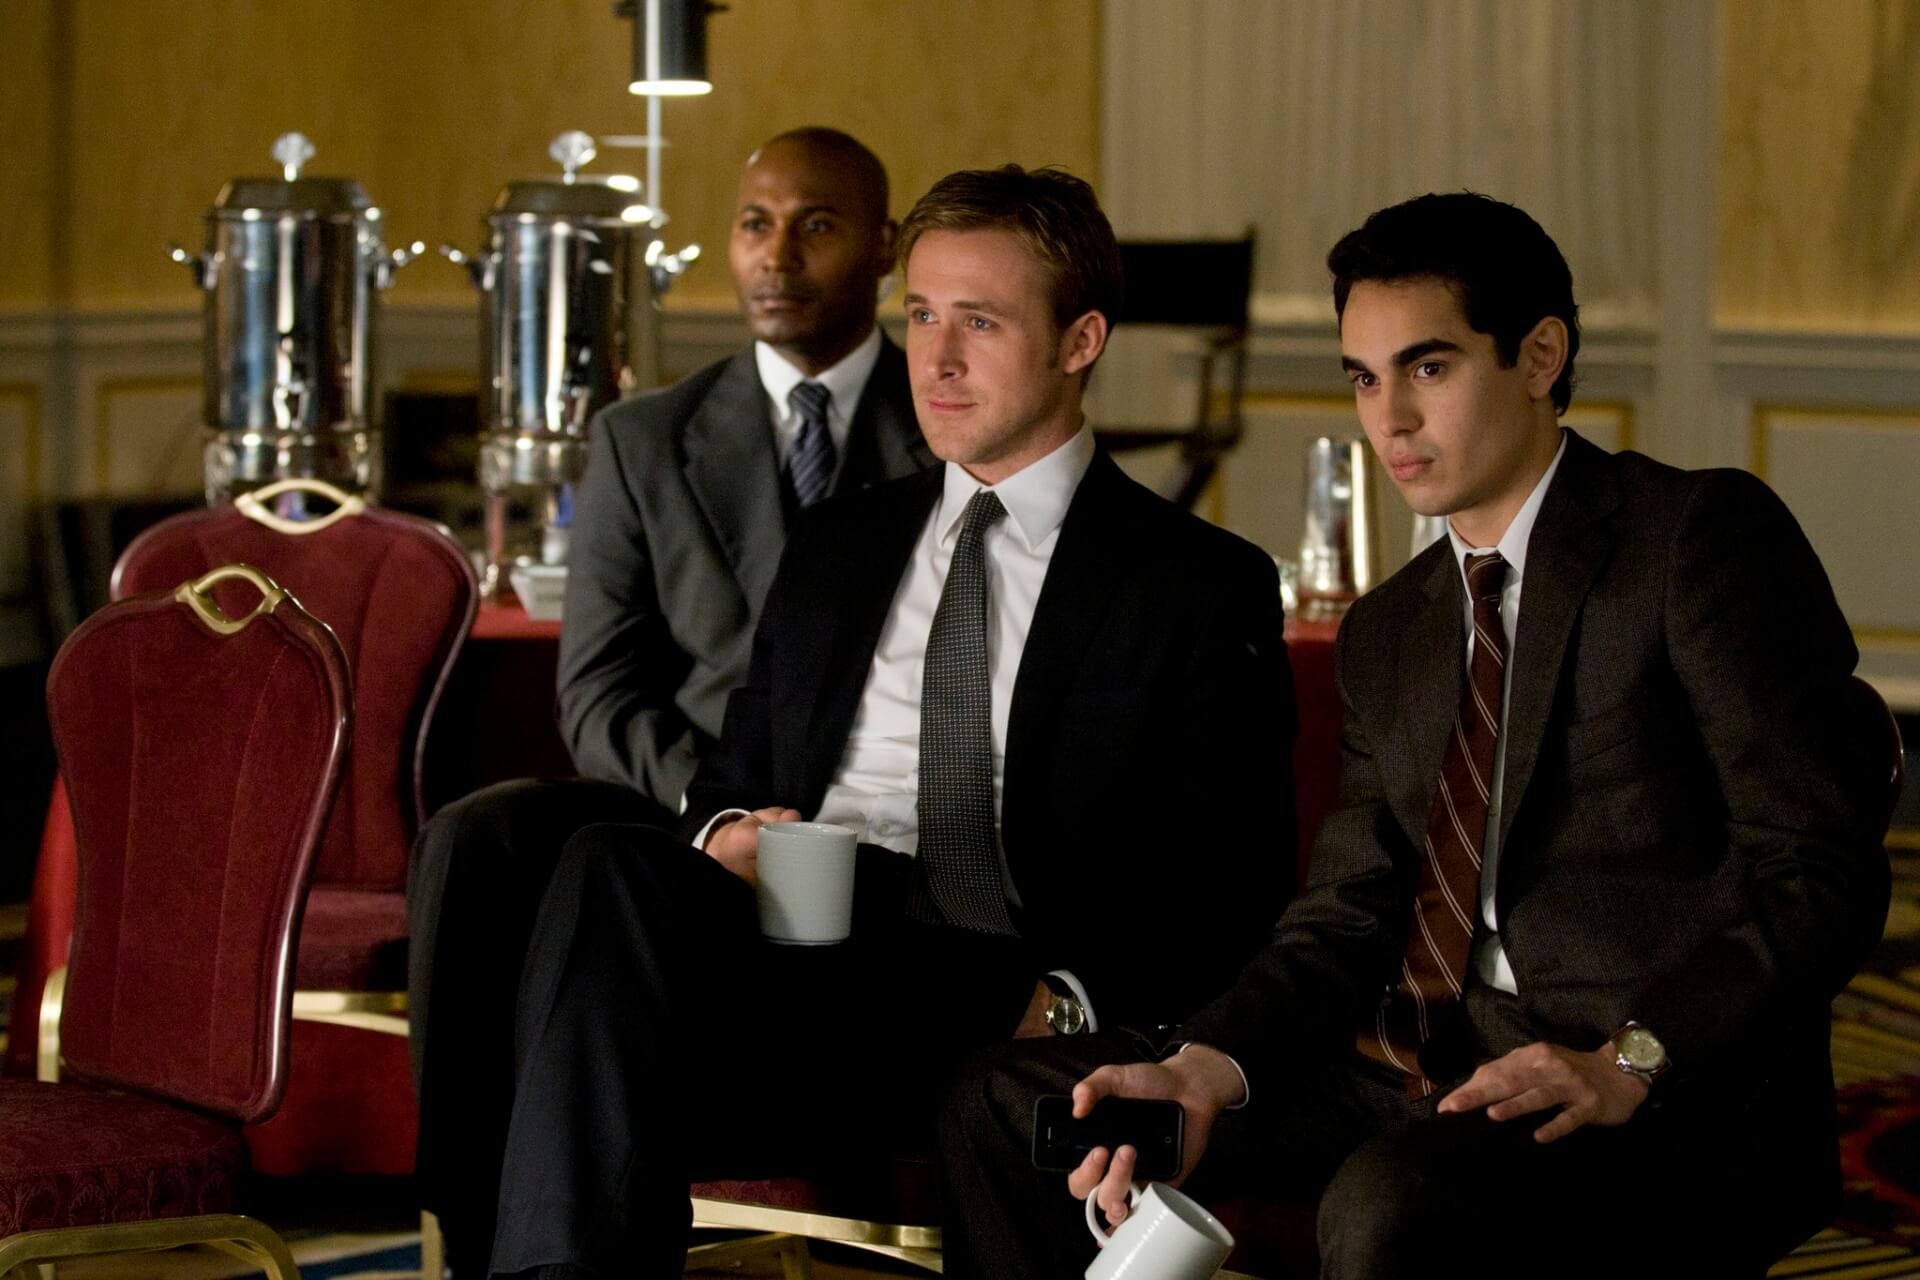 THE IDES OF MARCH Ryan Gosling Max Minghella